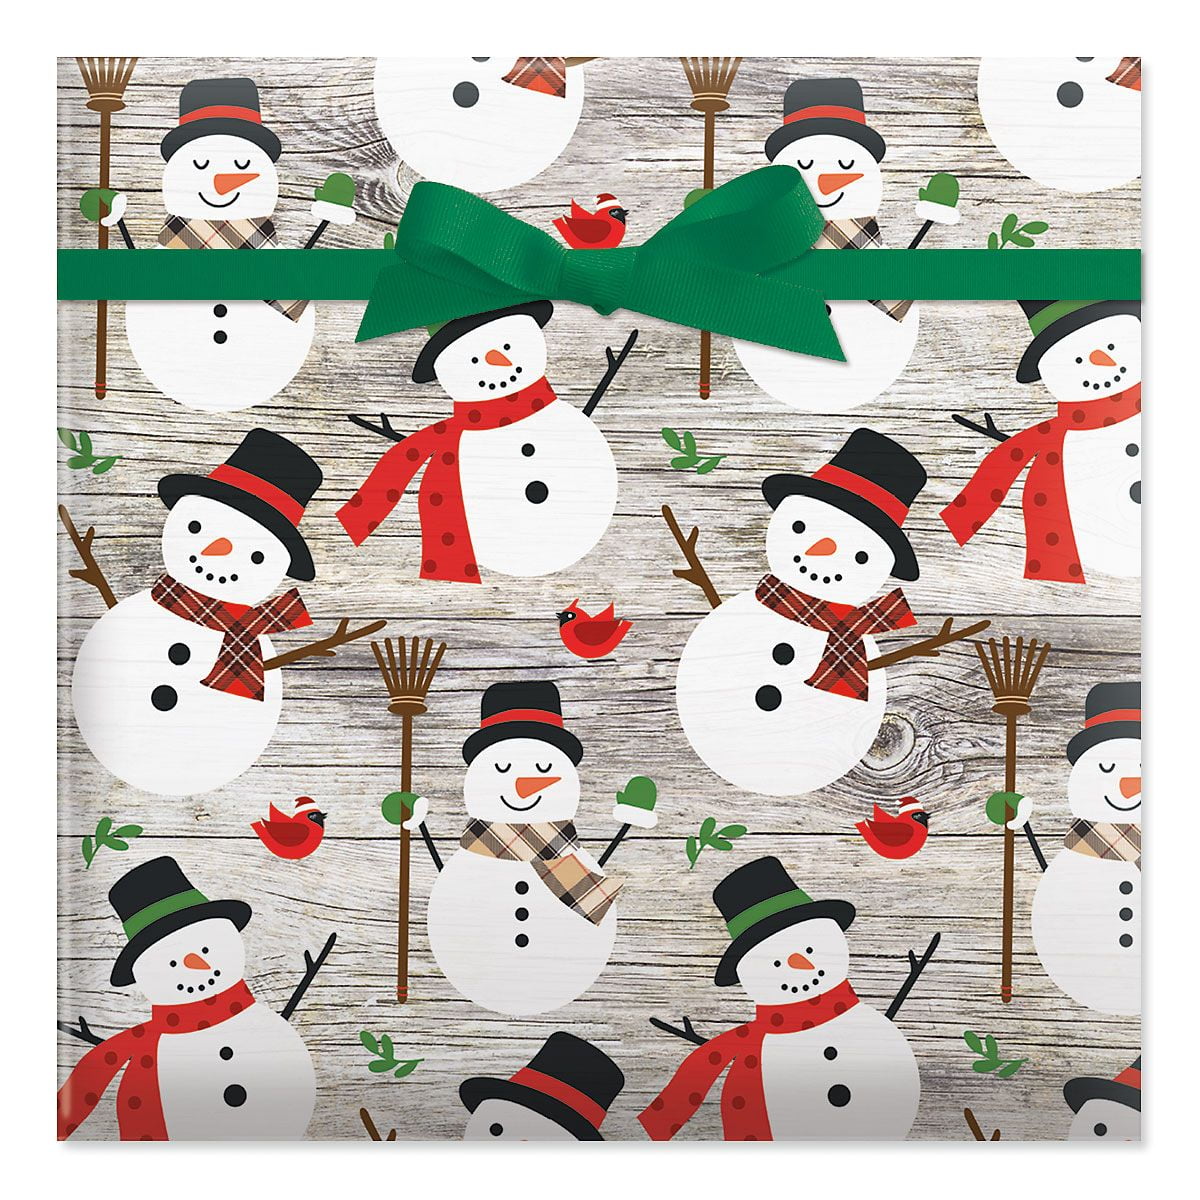 Holiday Friends Santa Snowman Winter Christmas Party Plastic Giant Gift Sack Bag 